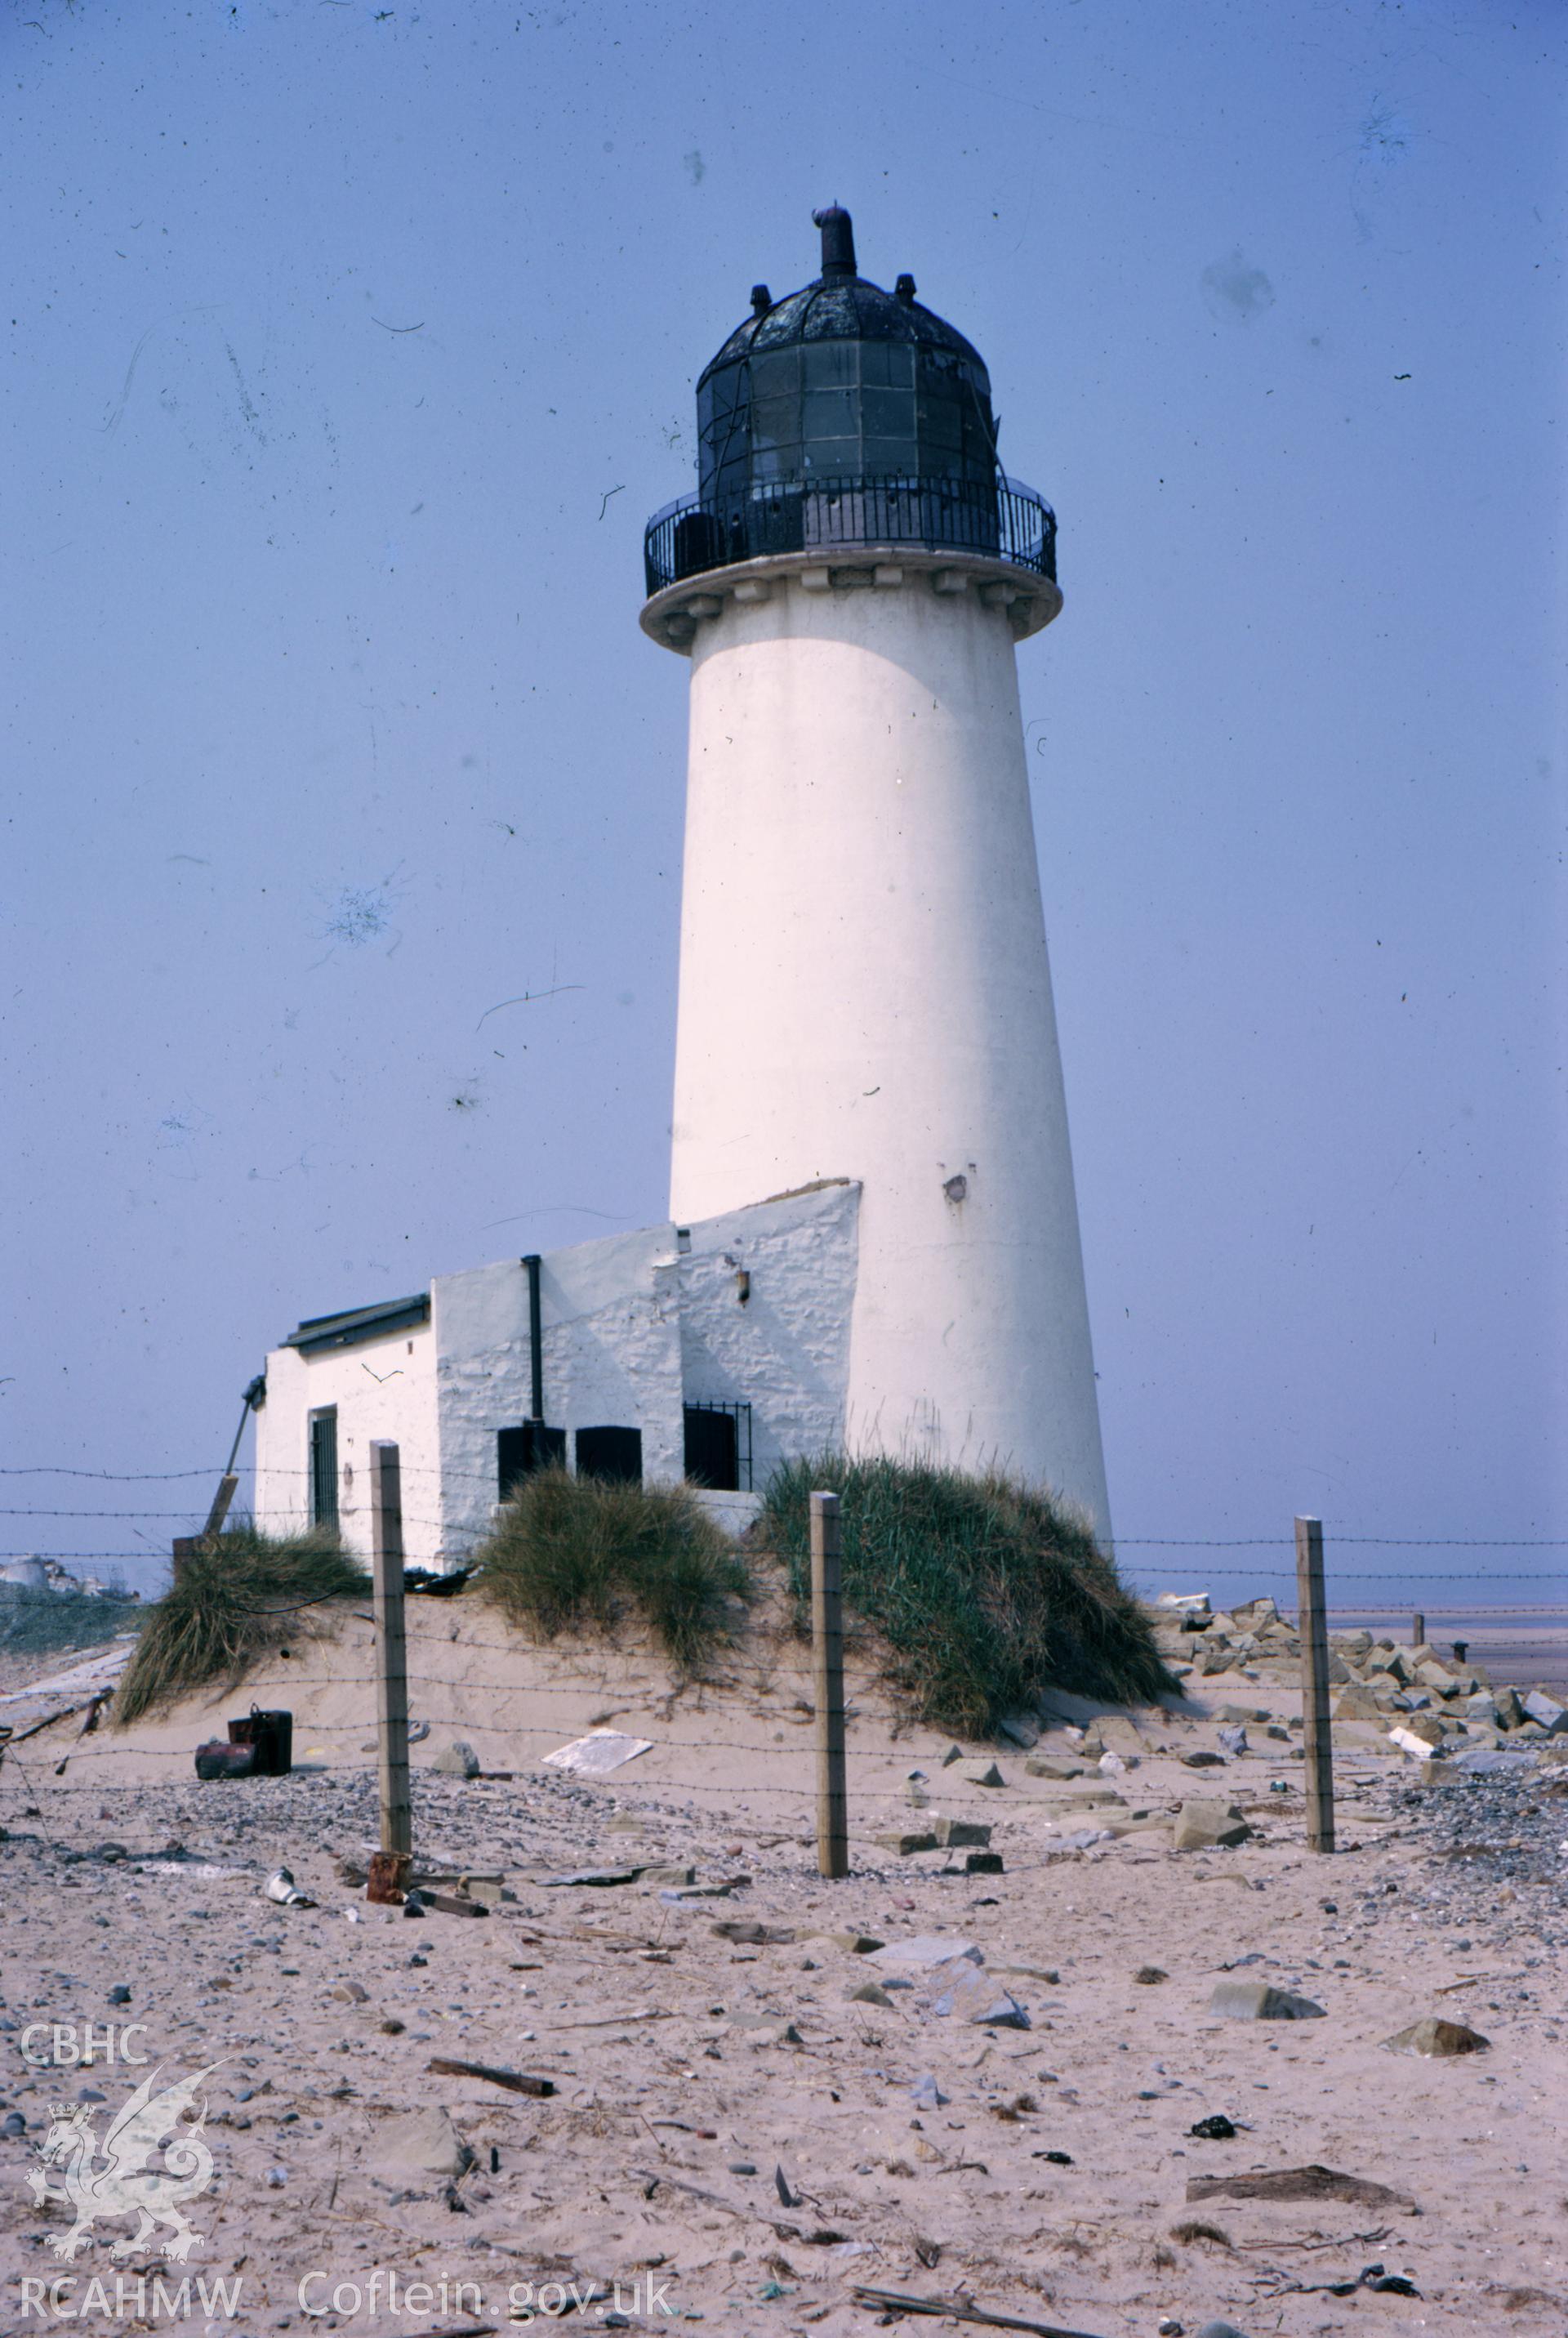 Colour slide showing general view of Point of Ayr Lighthouse.